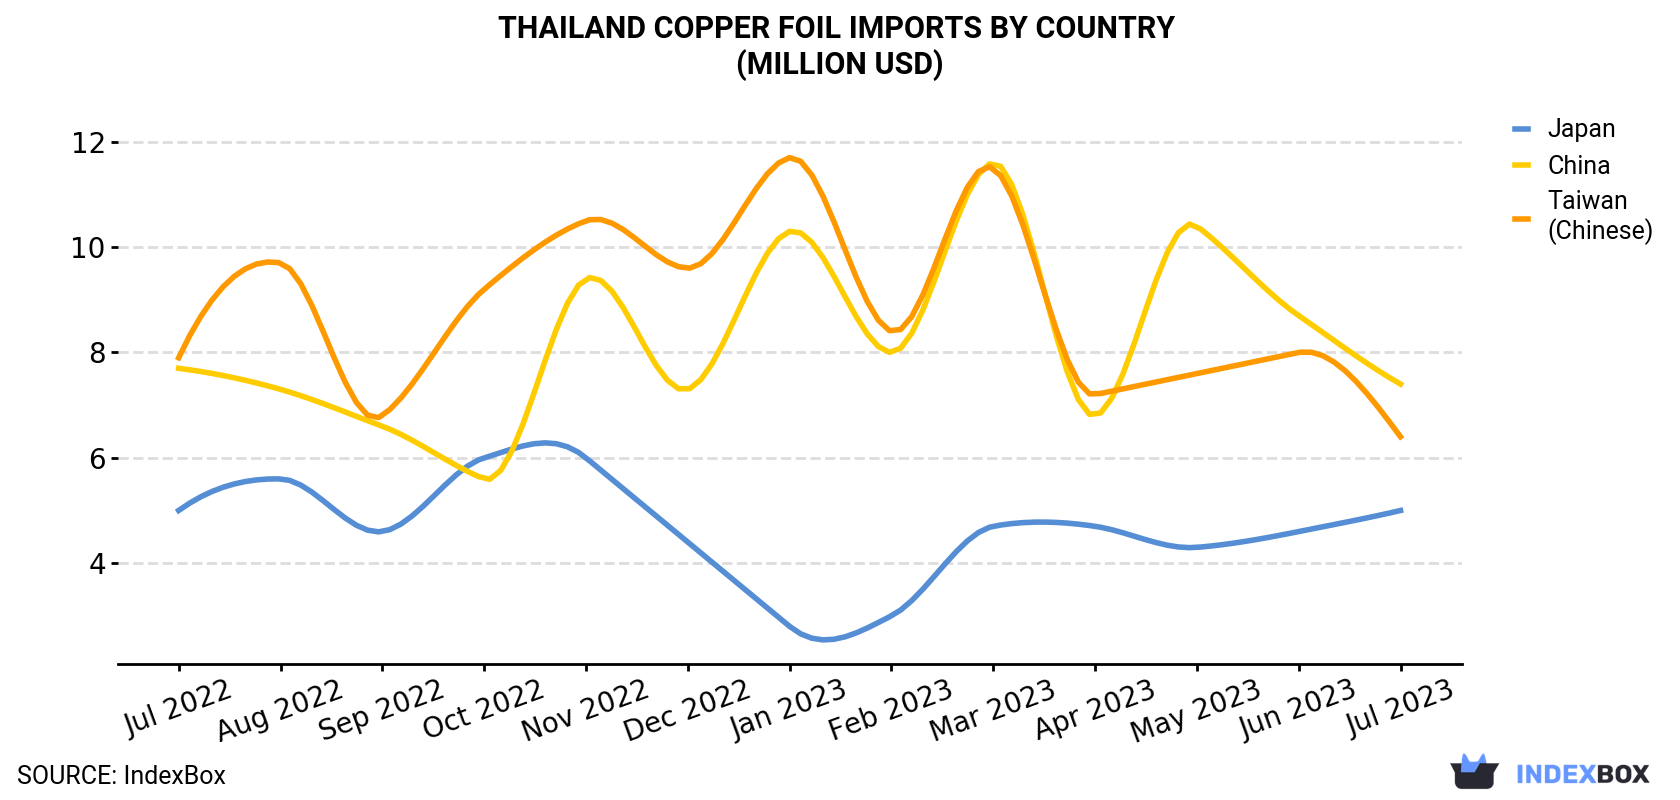 Thailand Copper Foil Imports By Country (Million USD)